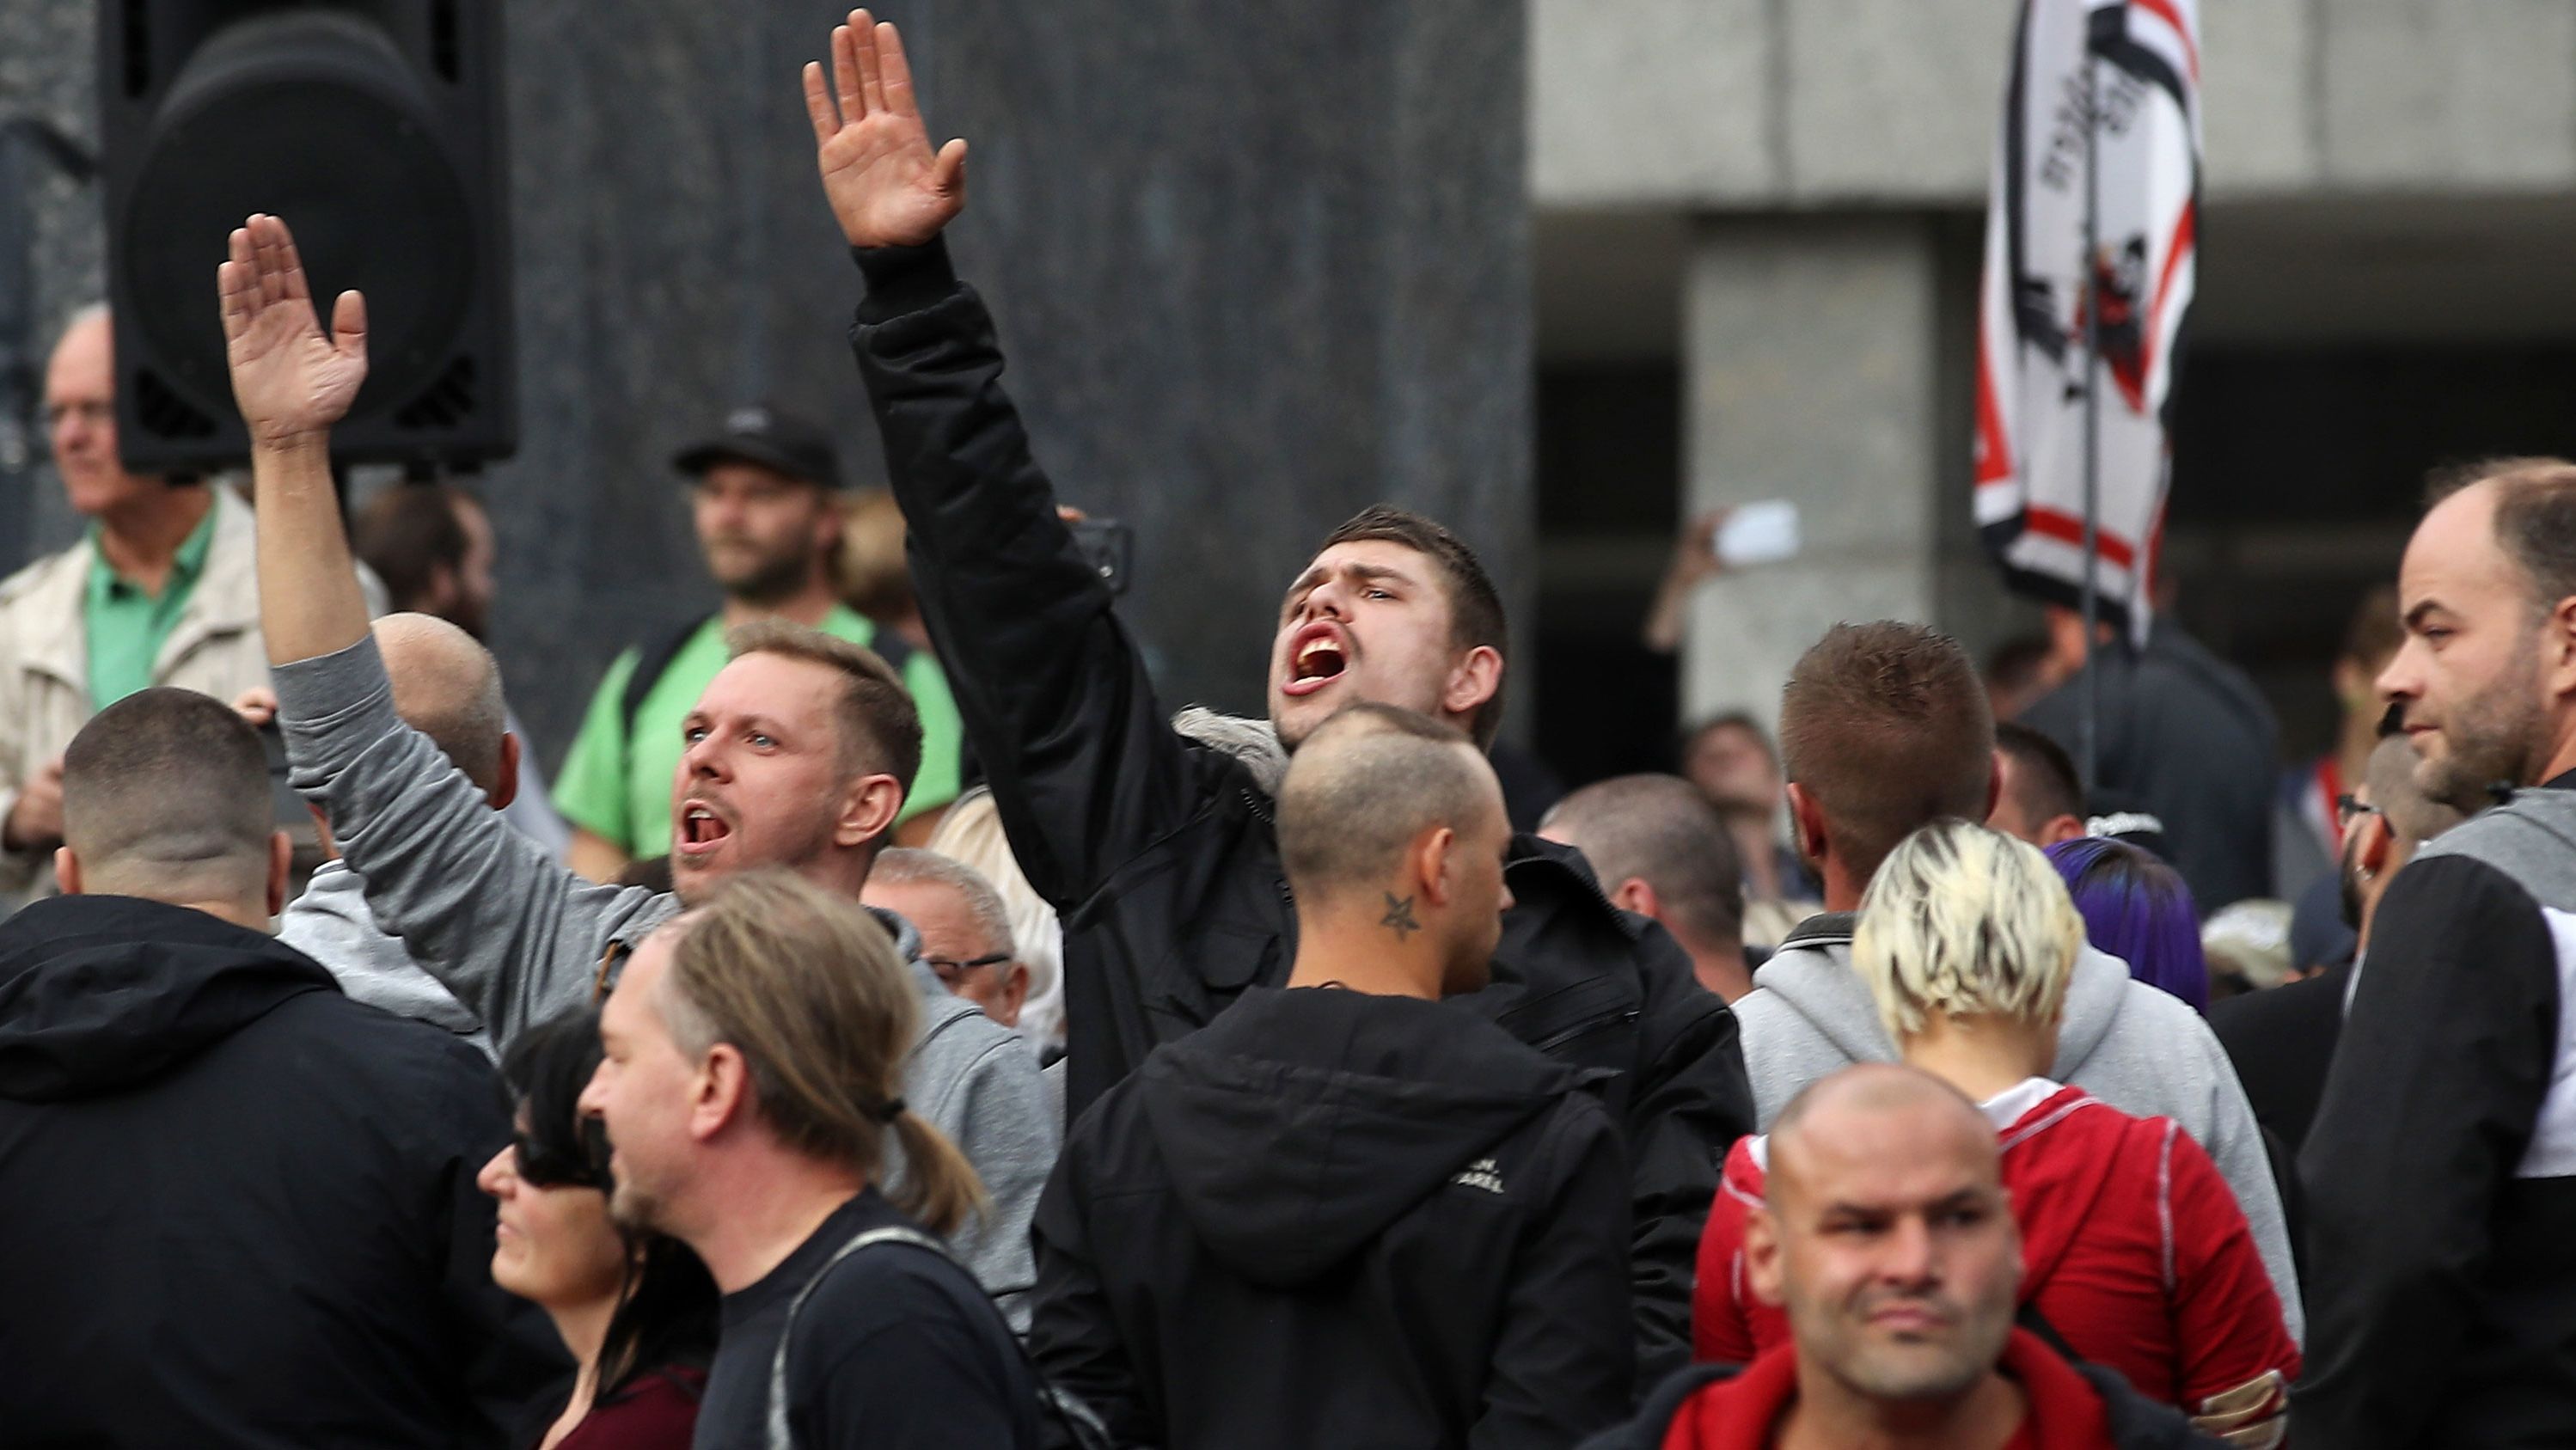  A man raises his arm in a Heil Hitler salute at a protest in Chemnitz last Monday.